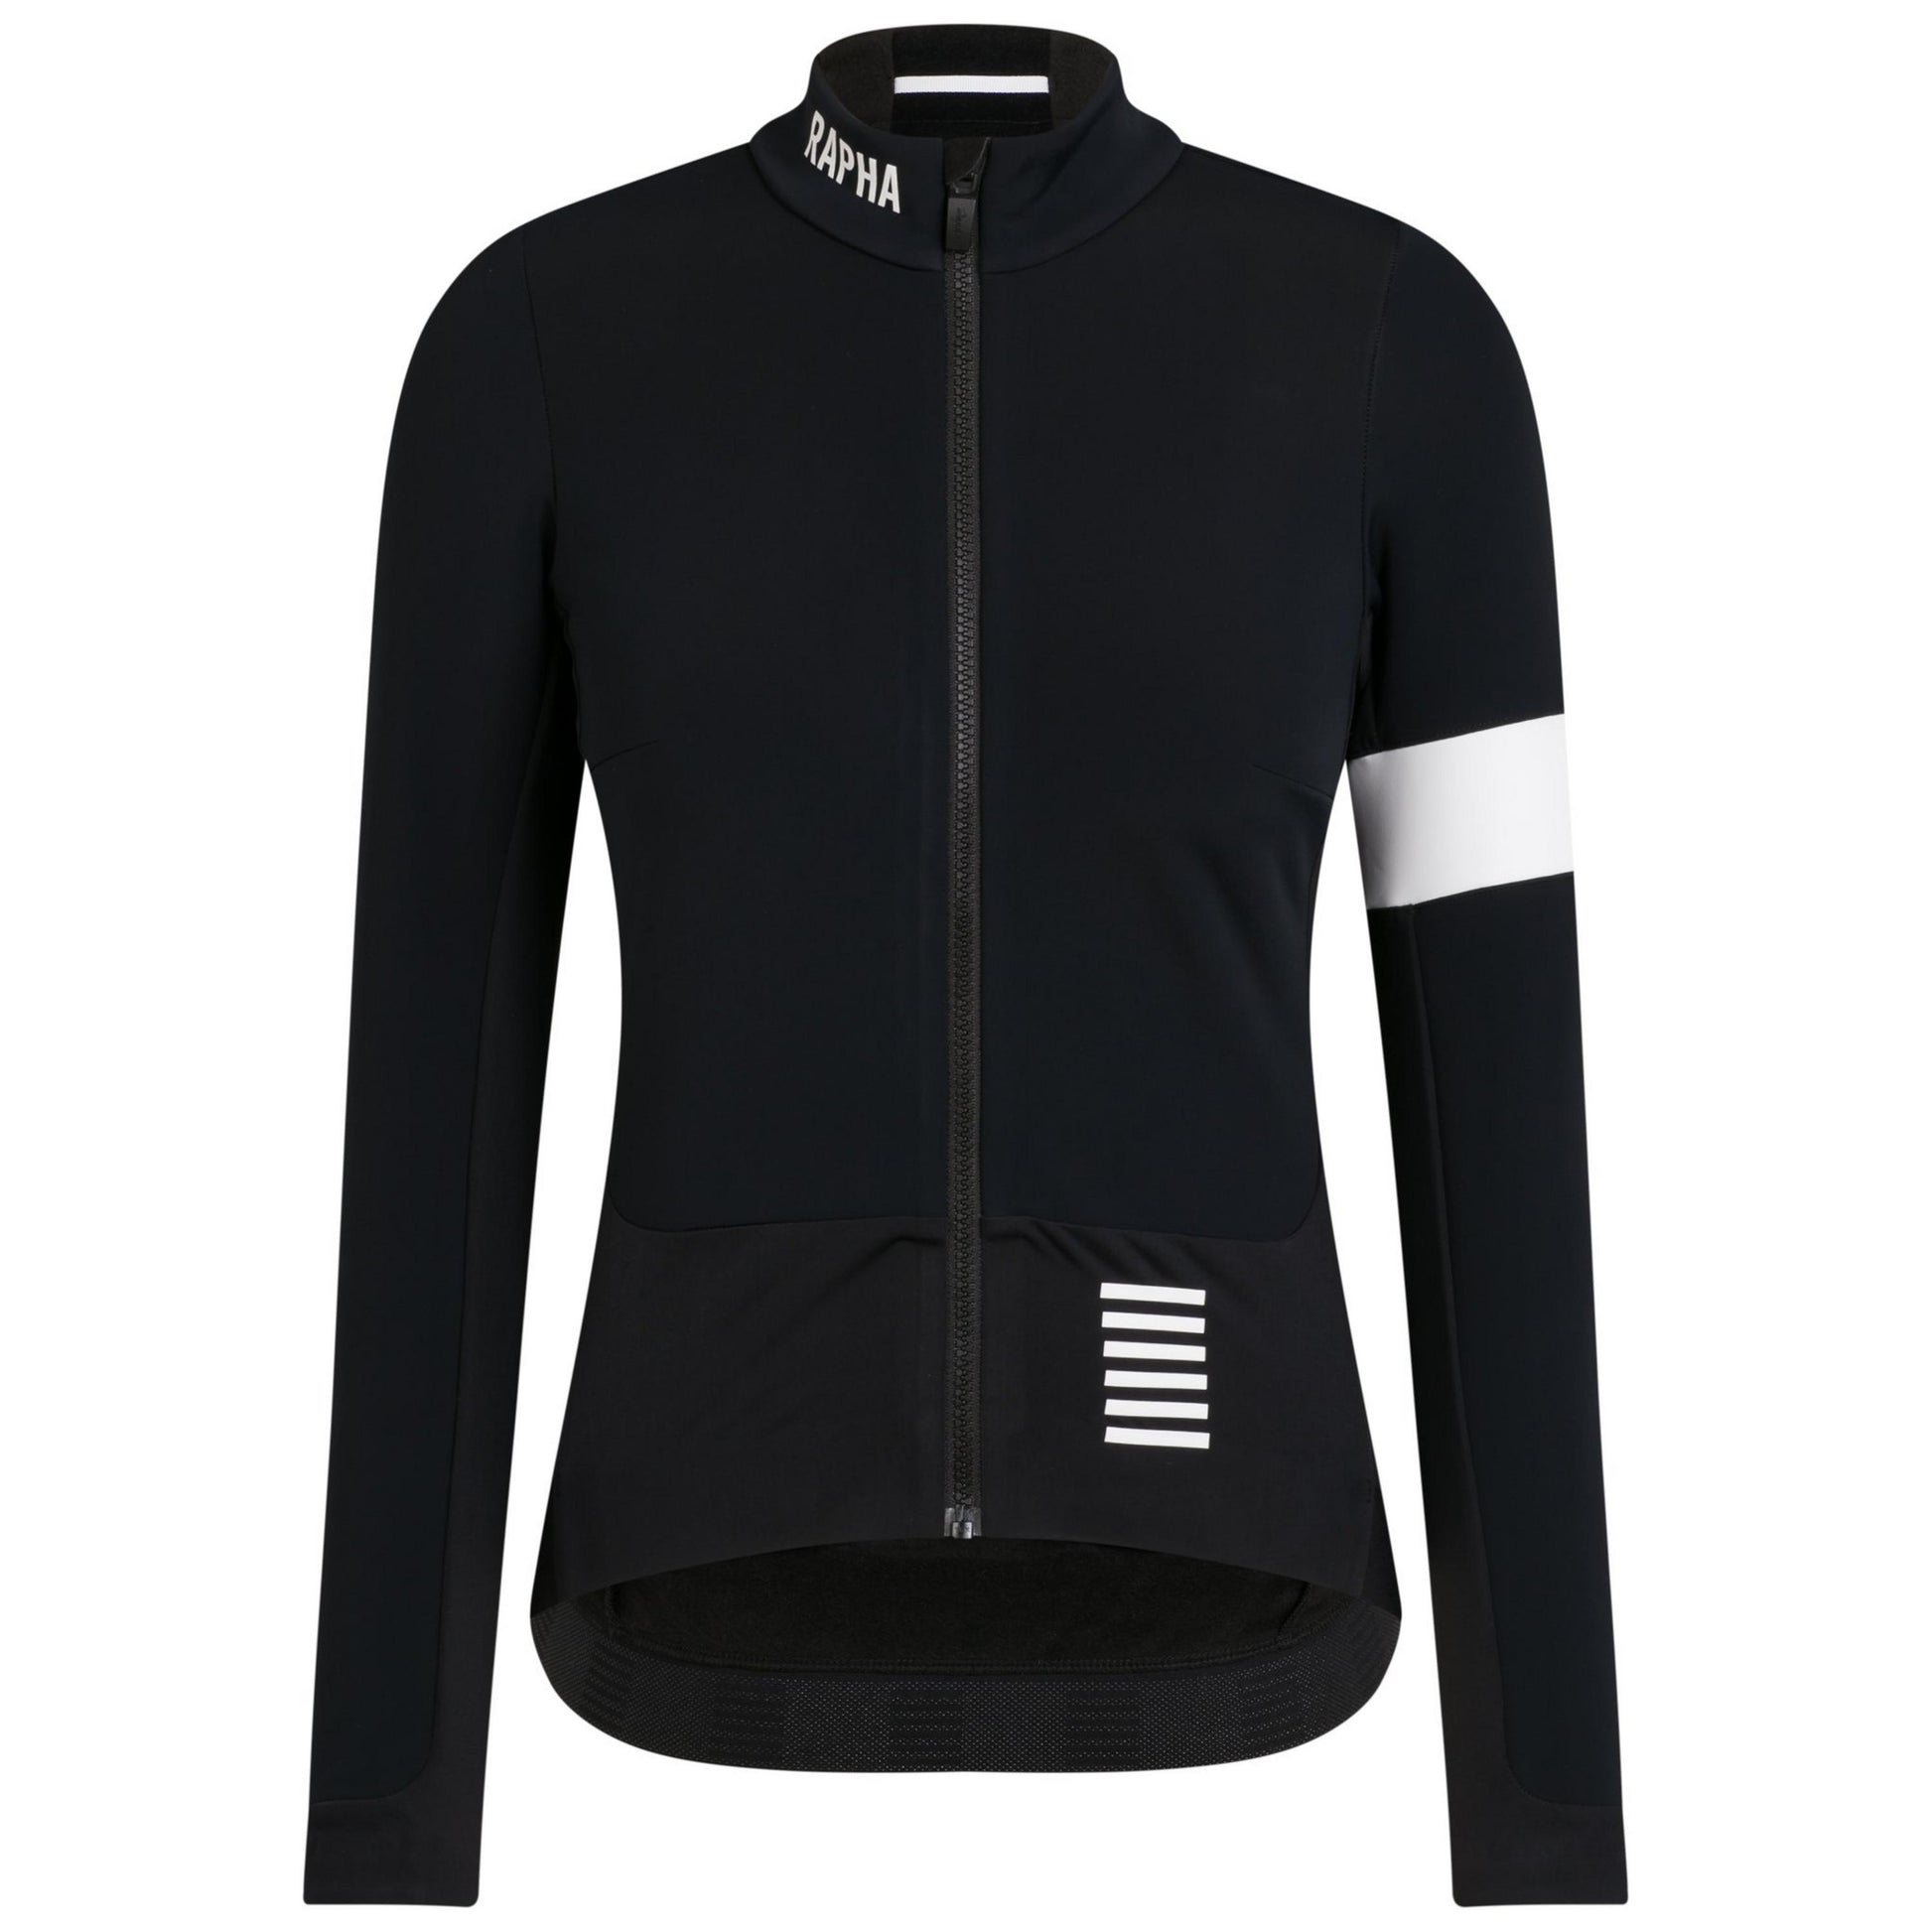 Rapha Women's Pro Team Winter Jacket - Black buy online at Woolys Wheels Sydney with free delivery